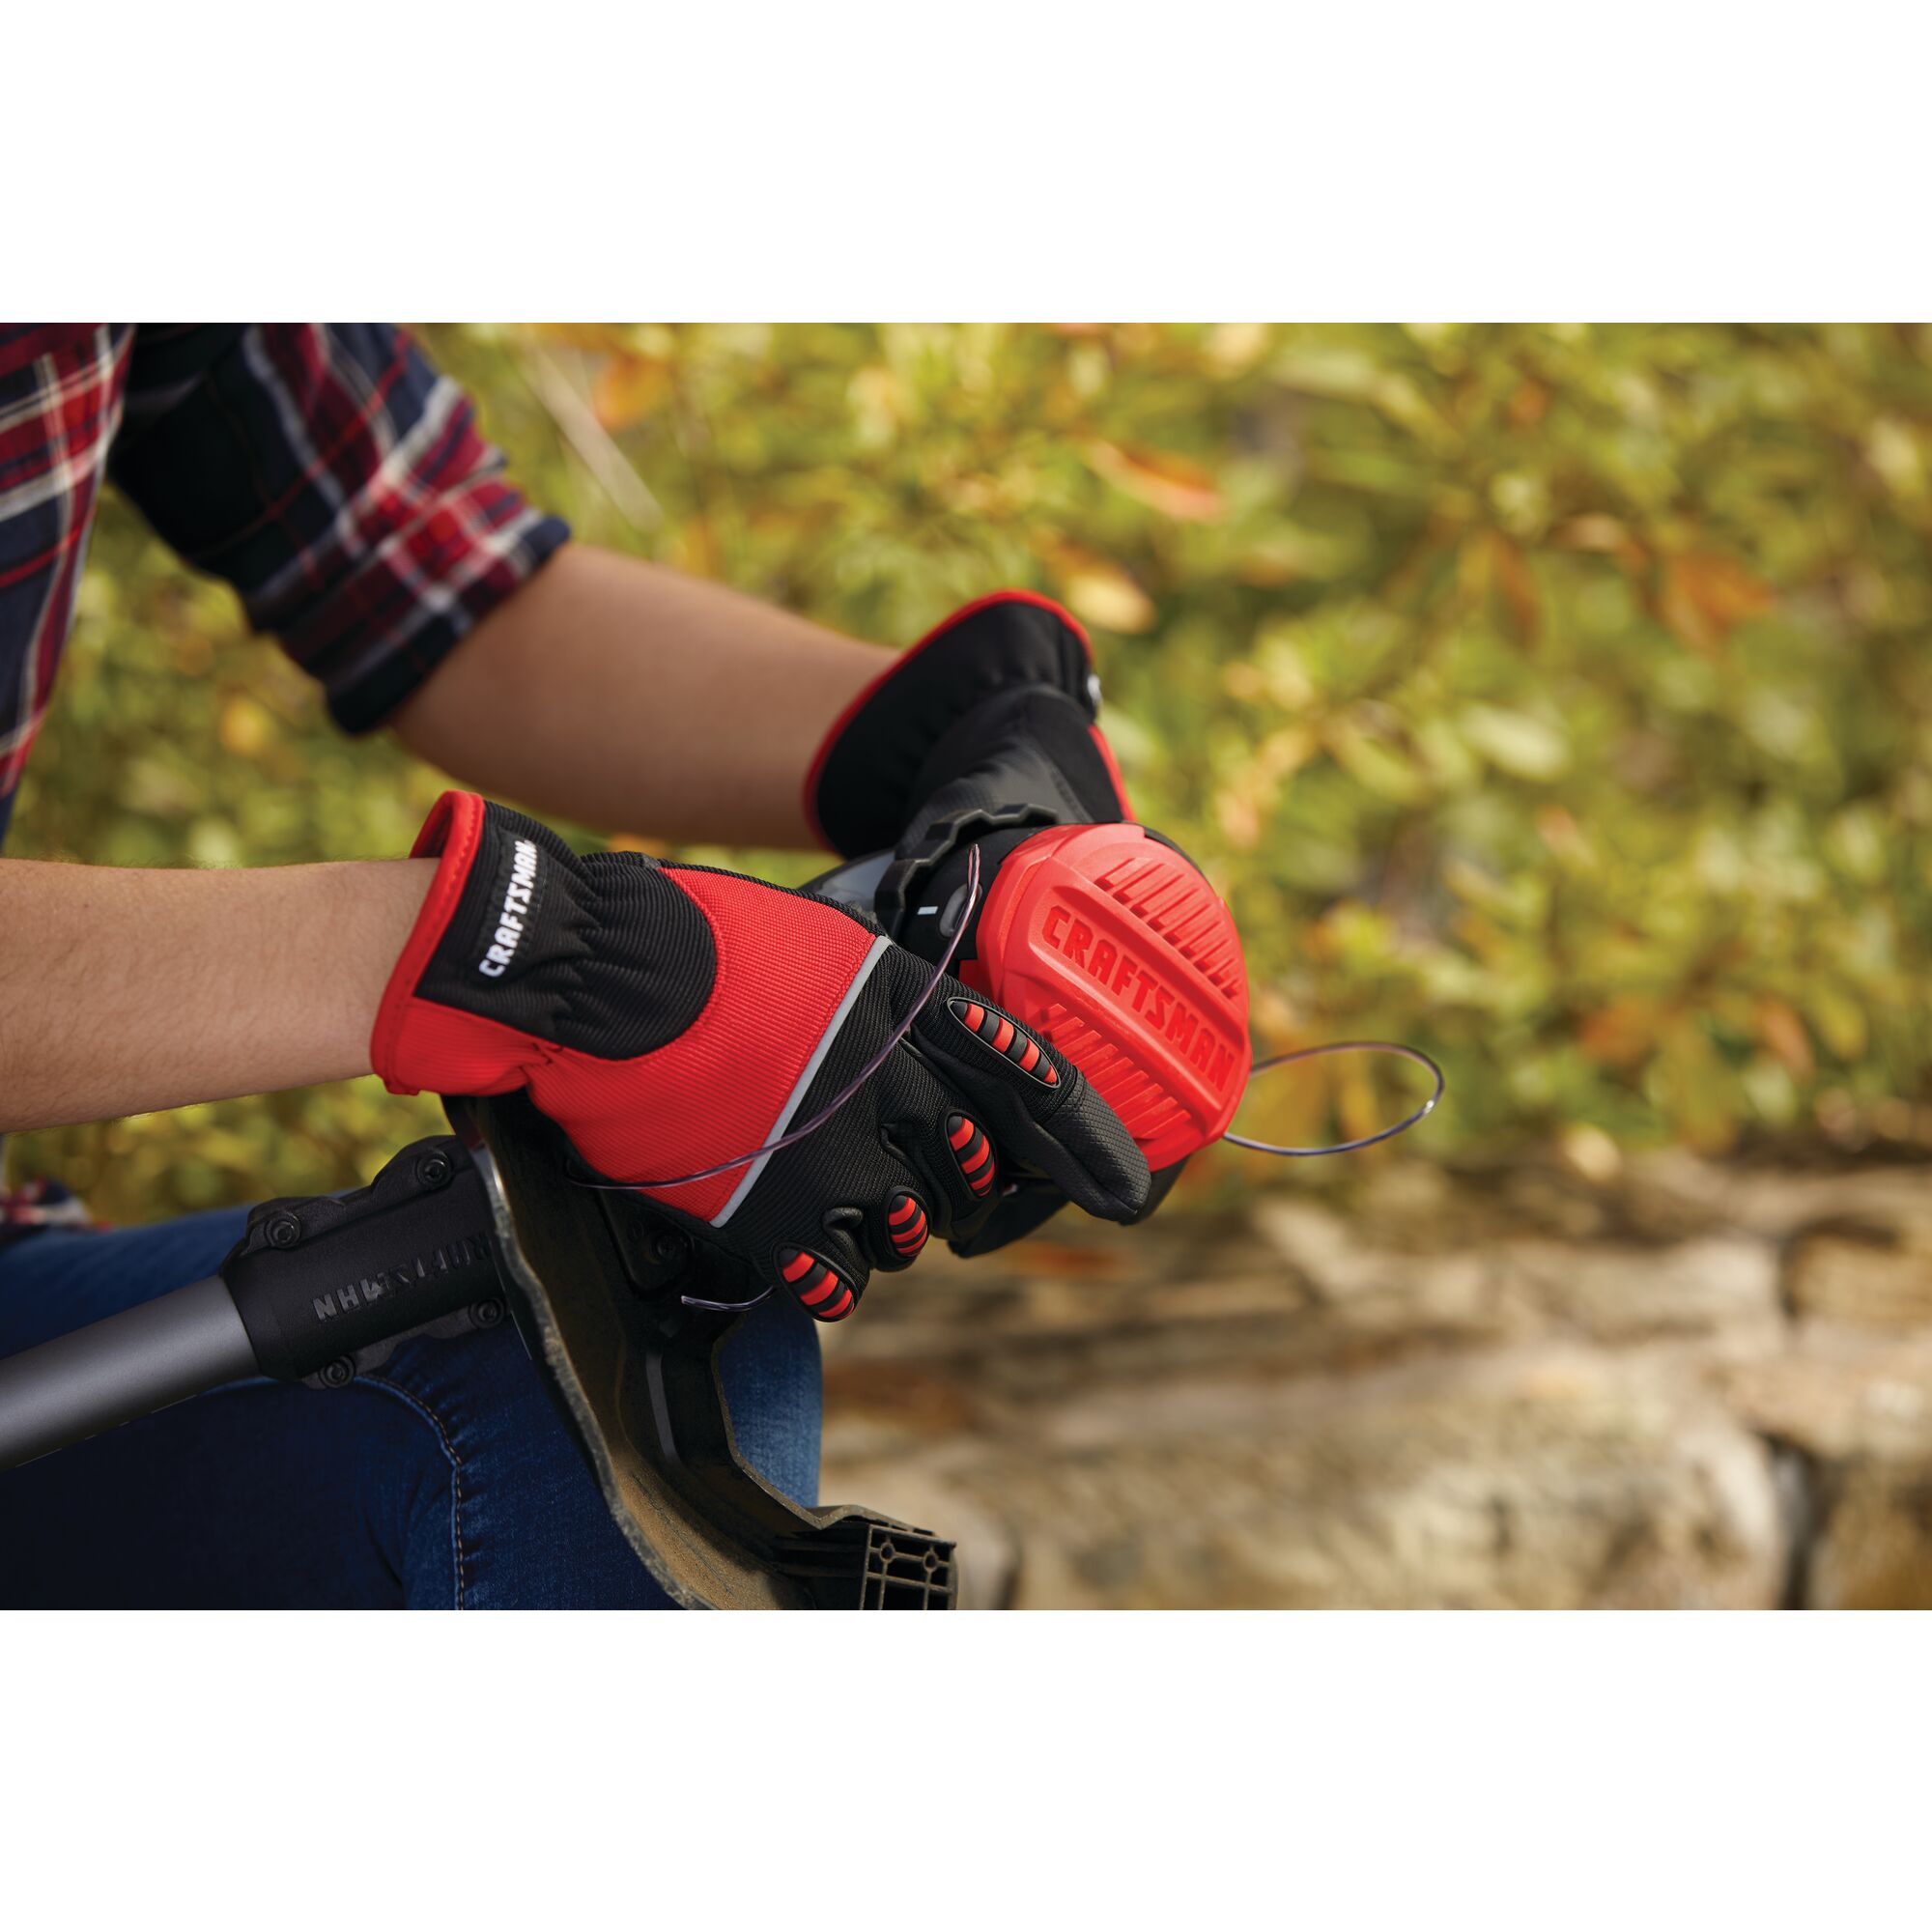 View of CRAFTSMAN String Trimmers highlighting product features